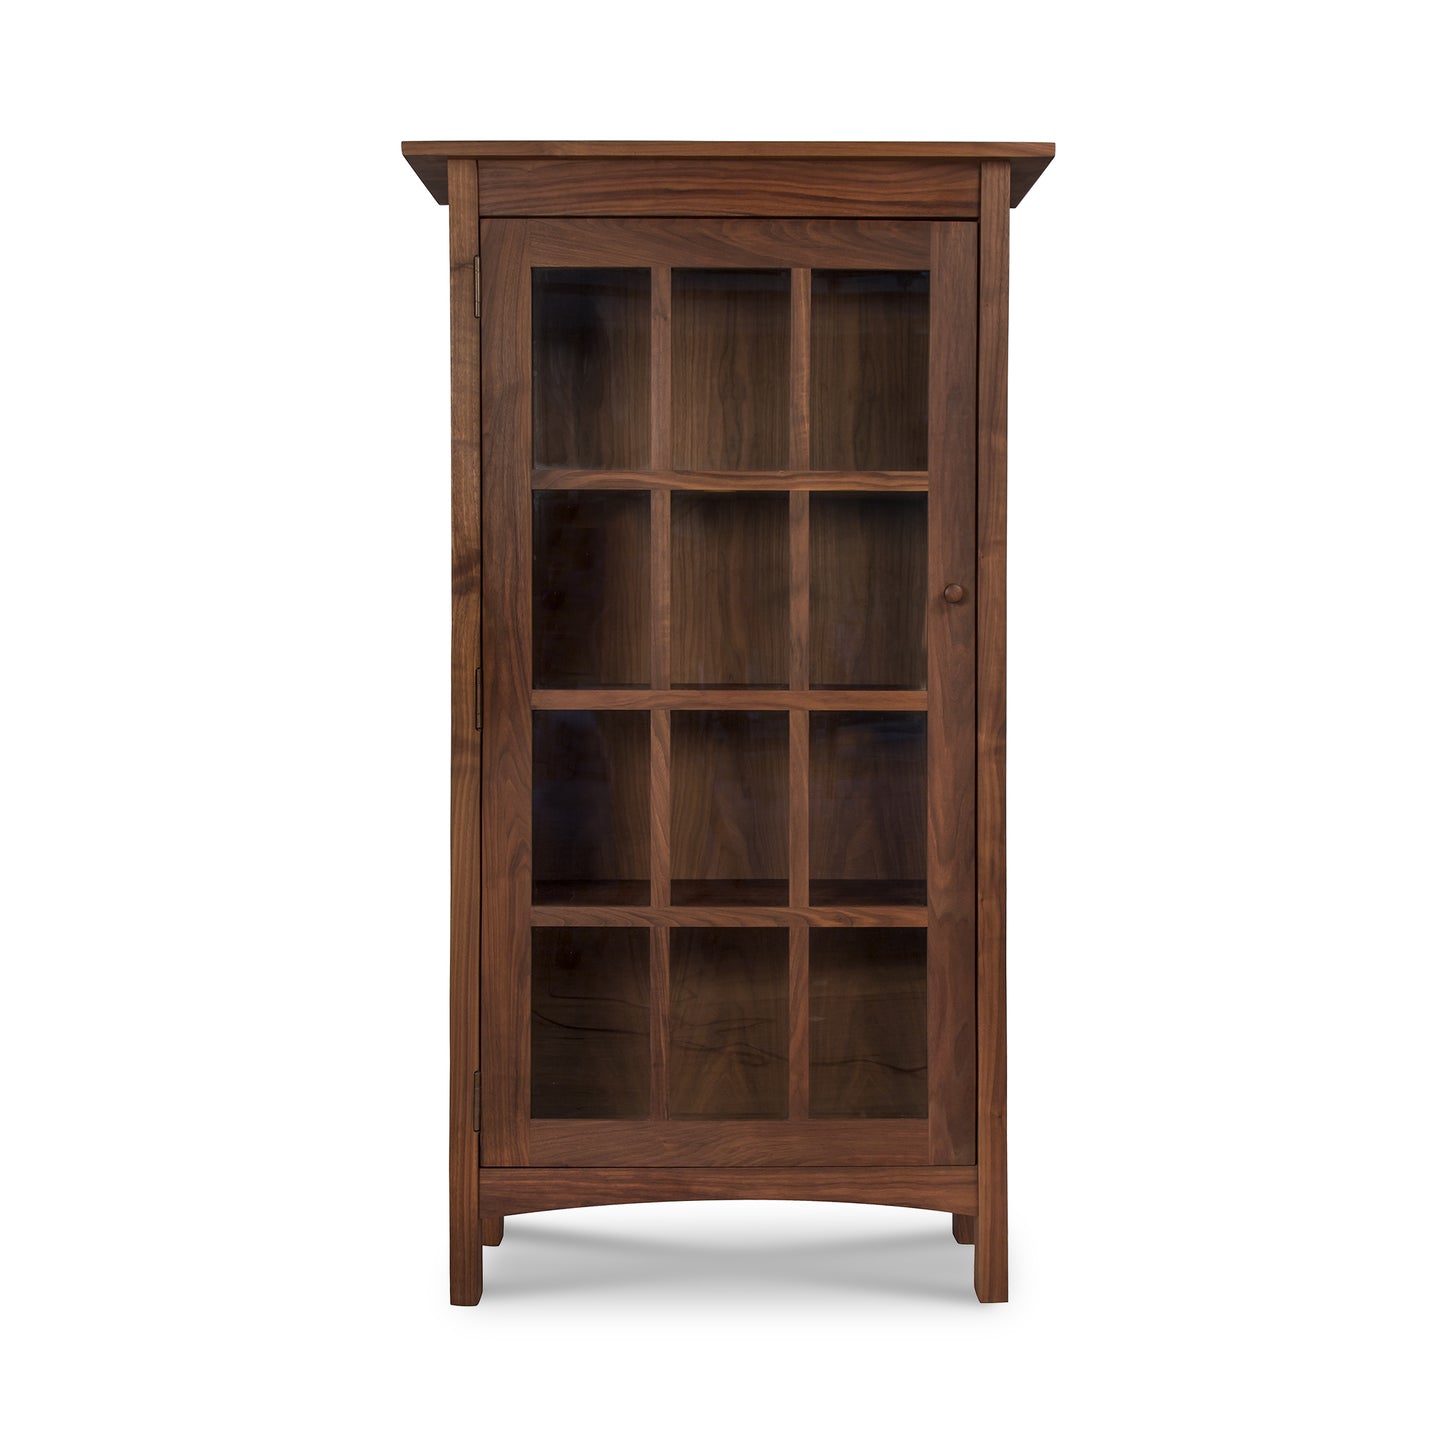 A Vermont Furniture Designs Burlington Shaker Glass Door Bookcase isolated on a white background.